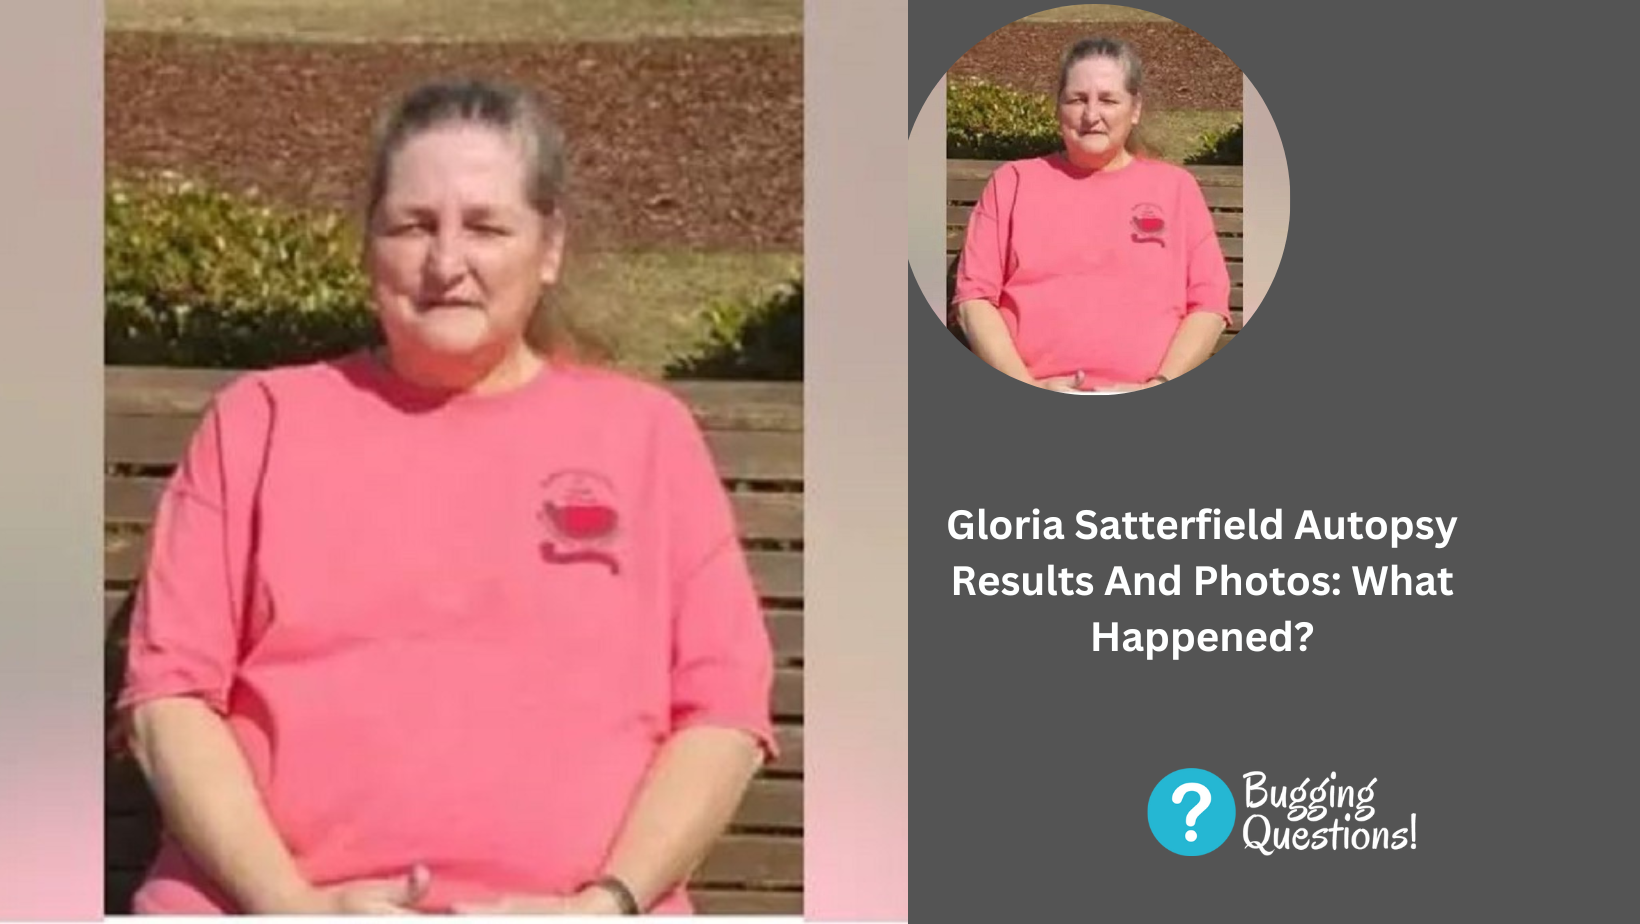 Gloria Satterfield Autopsy Results And Photos: What Happened? Everything You Should Know